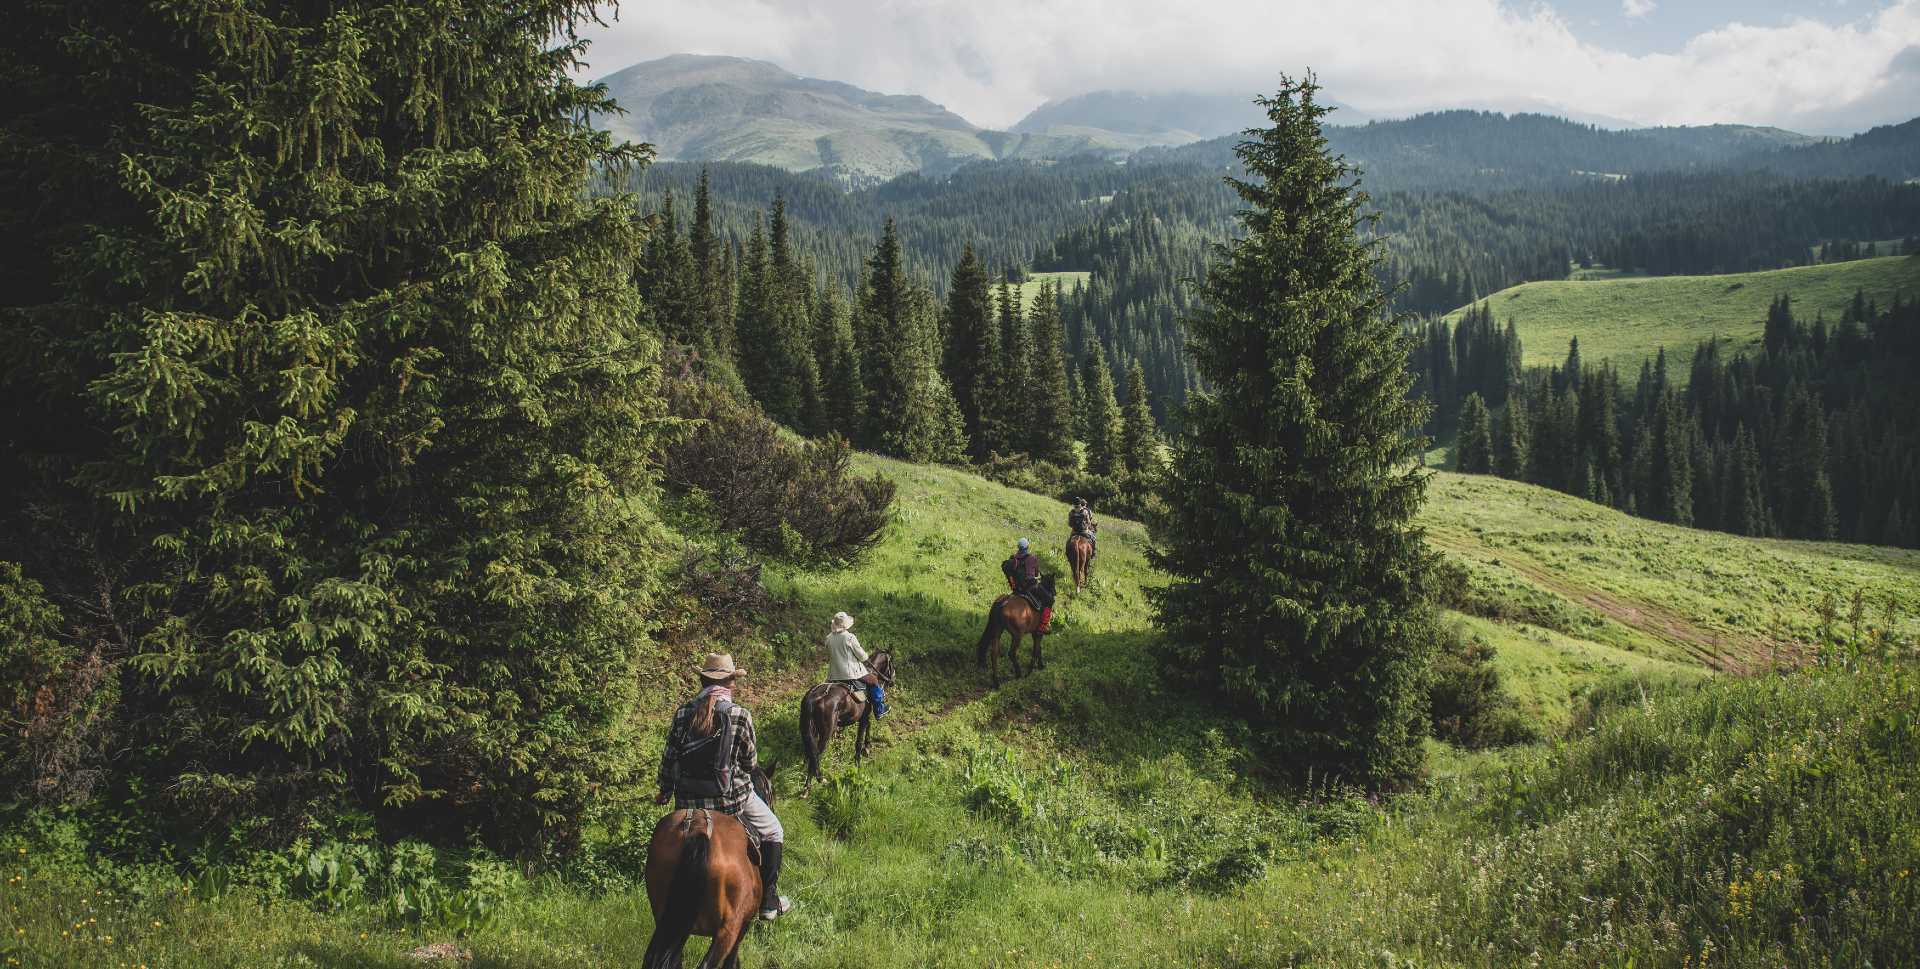 Four people on horseback riding down a grassy mountain between stands of trees.